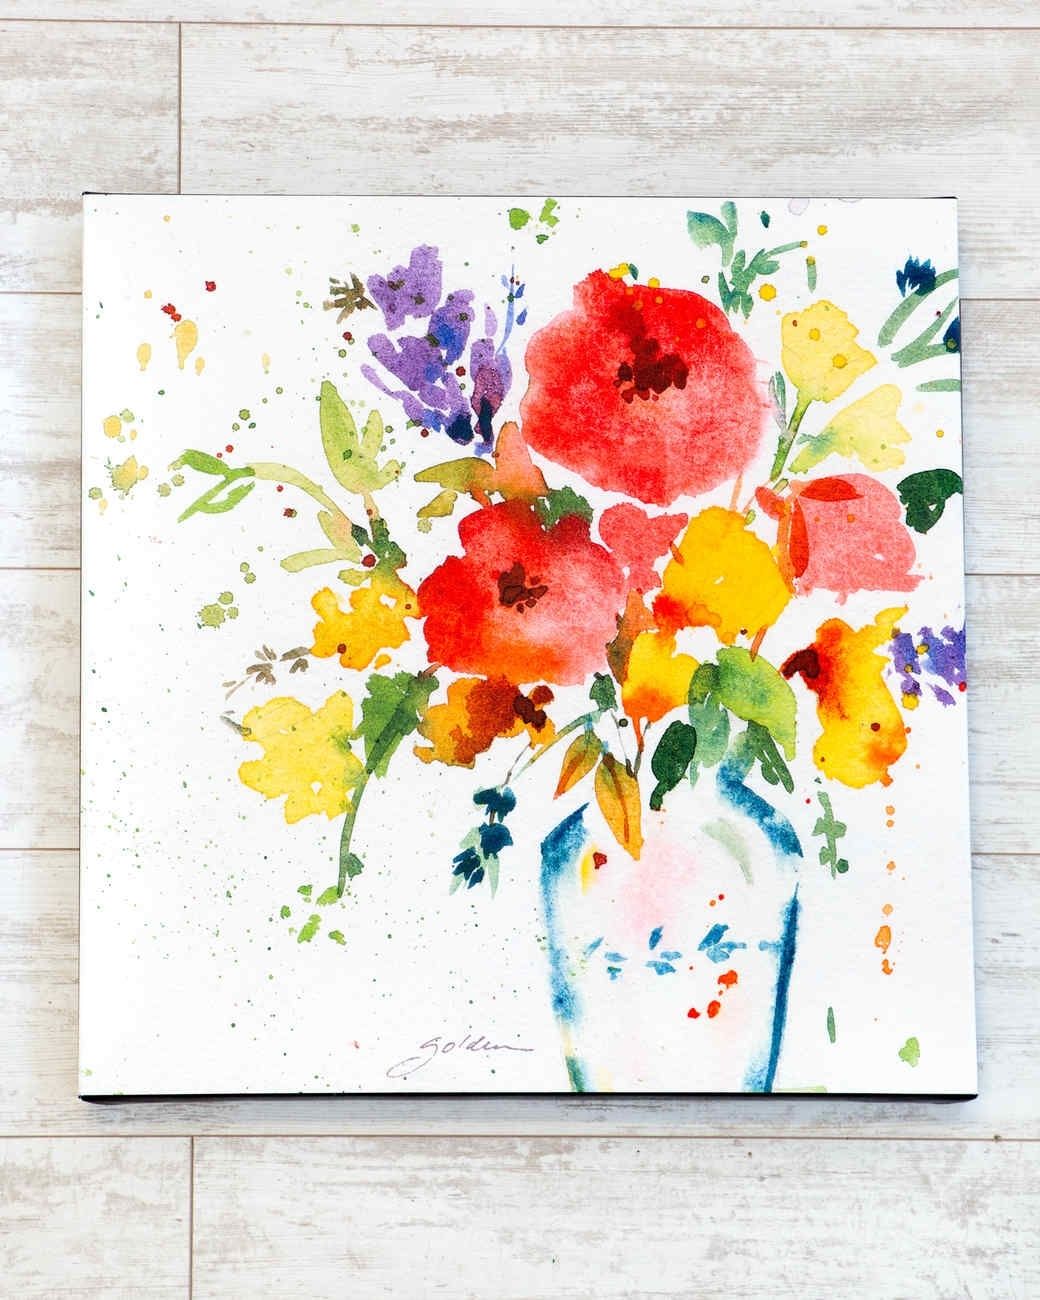 D Floral Canvas Good Floral Wall Art – Wall Decoration And Wall Art In Floral Canvas Wall Art (View 12 of 20)